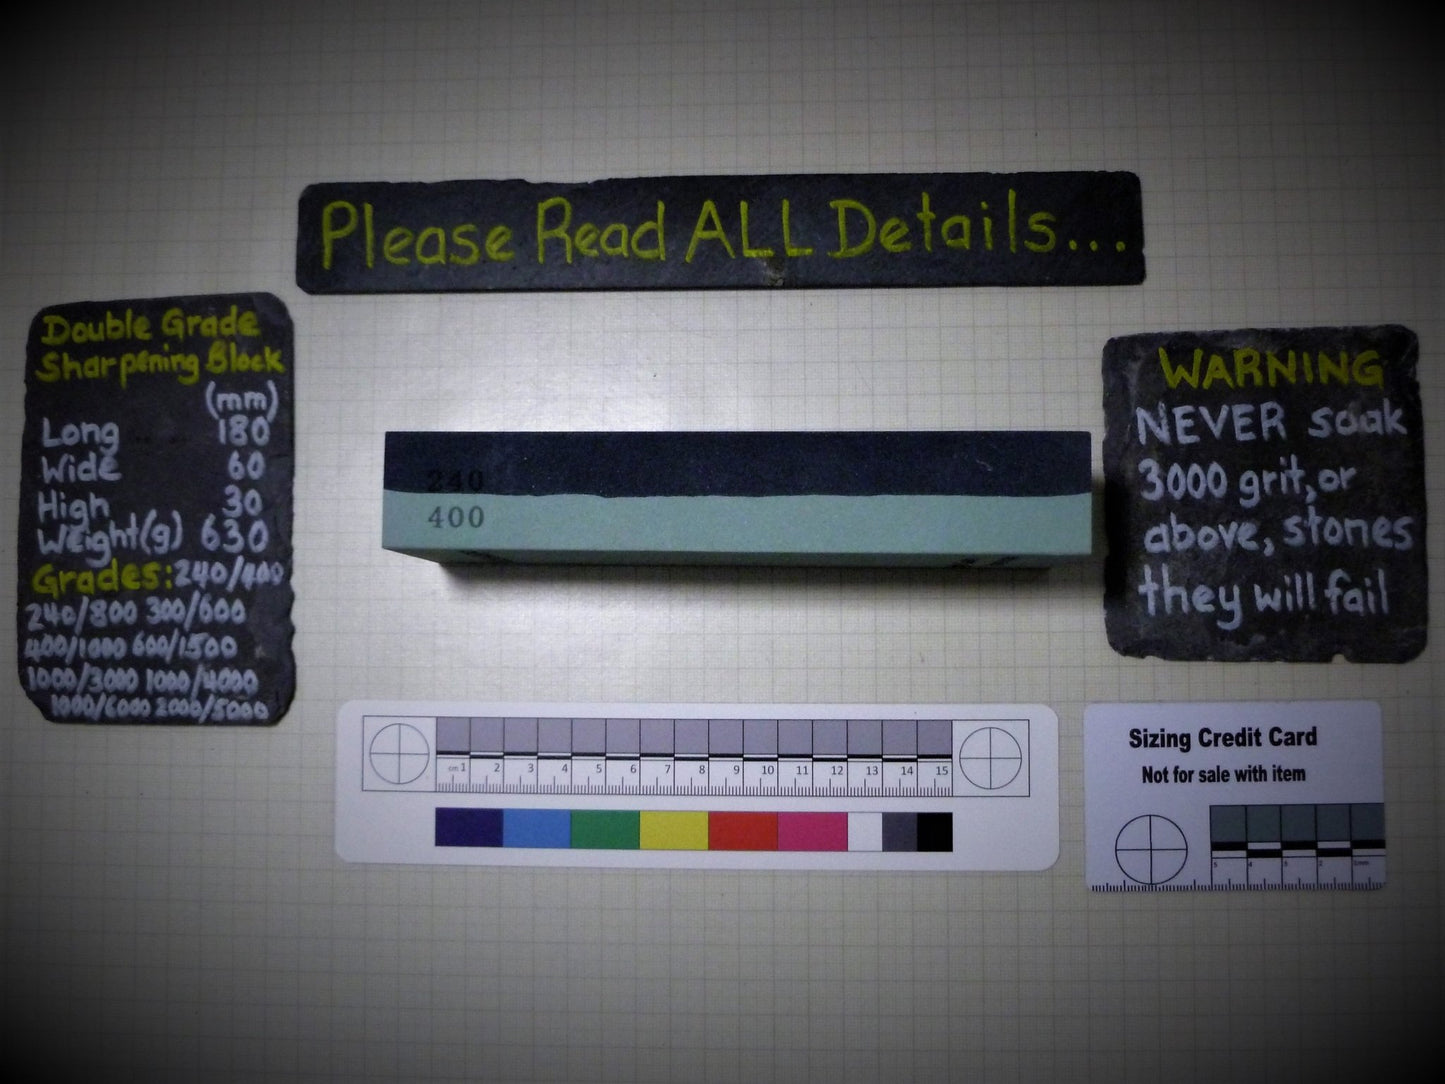 Double Sided and Graded Sharpening Stone - 300/600 Sharpening Stone Huggins Attic    [Huggins attic]